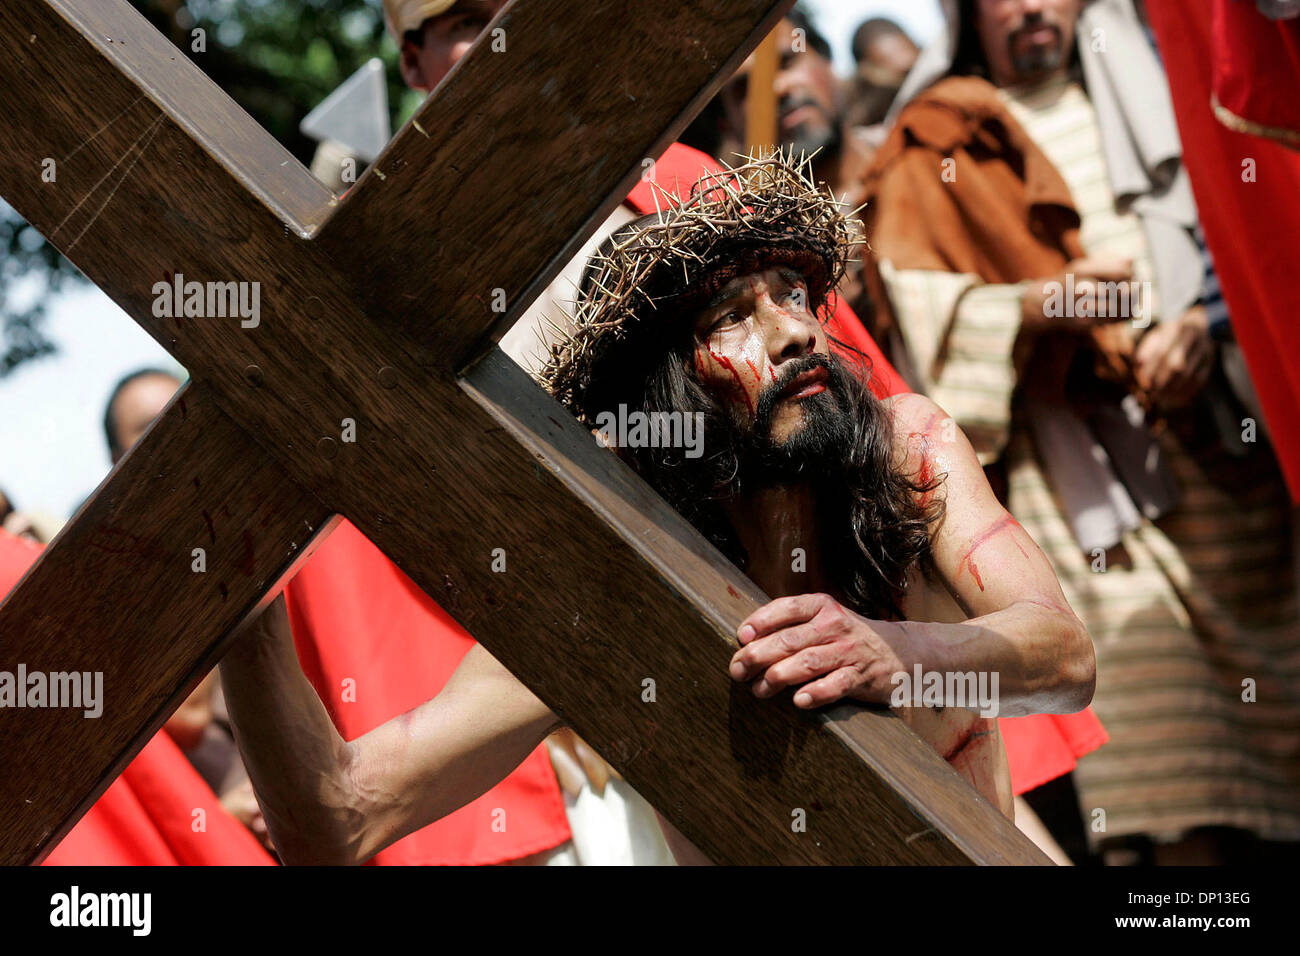 Apr 14, 2006; San Antonio, TX, USA; Derly Cirlos, portraying Jesus in San Fernando Cathedral's annual Via Crucis, struggles to rise after falling to the ground on his way through downtown San Antonio. Mandatory Credit: Photo by Mike Kane/ZUMA Press. (©) Copyright 2006 by San Antonio Express-News Stock Photo